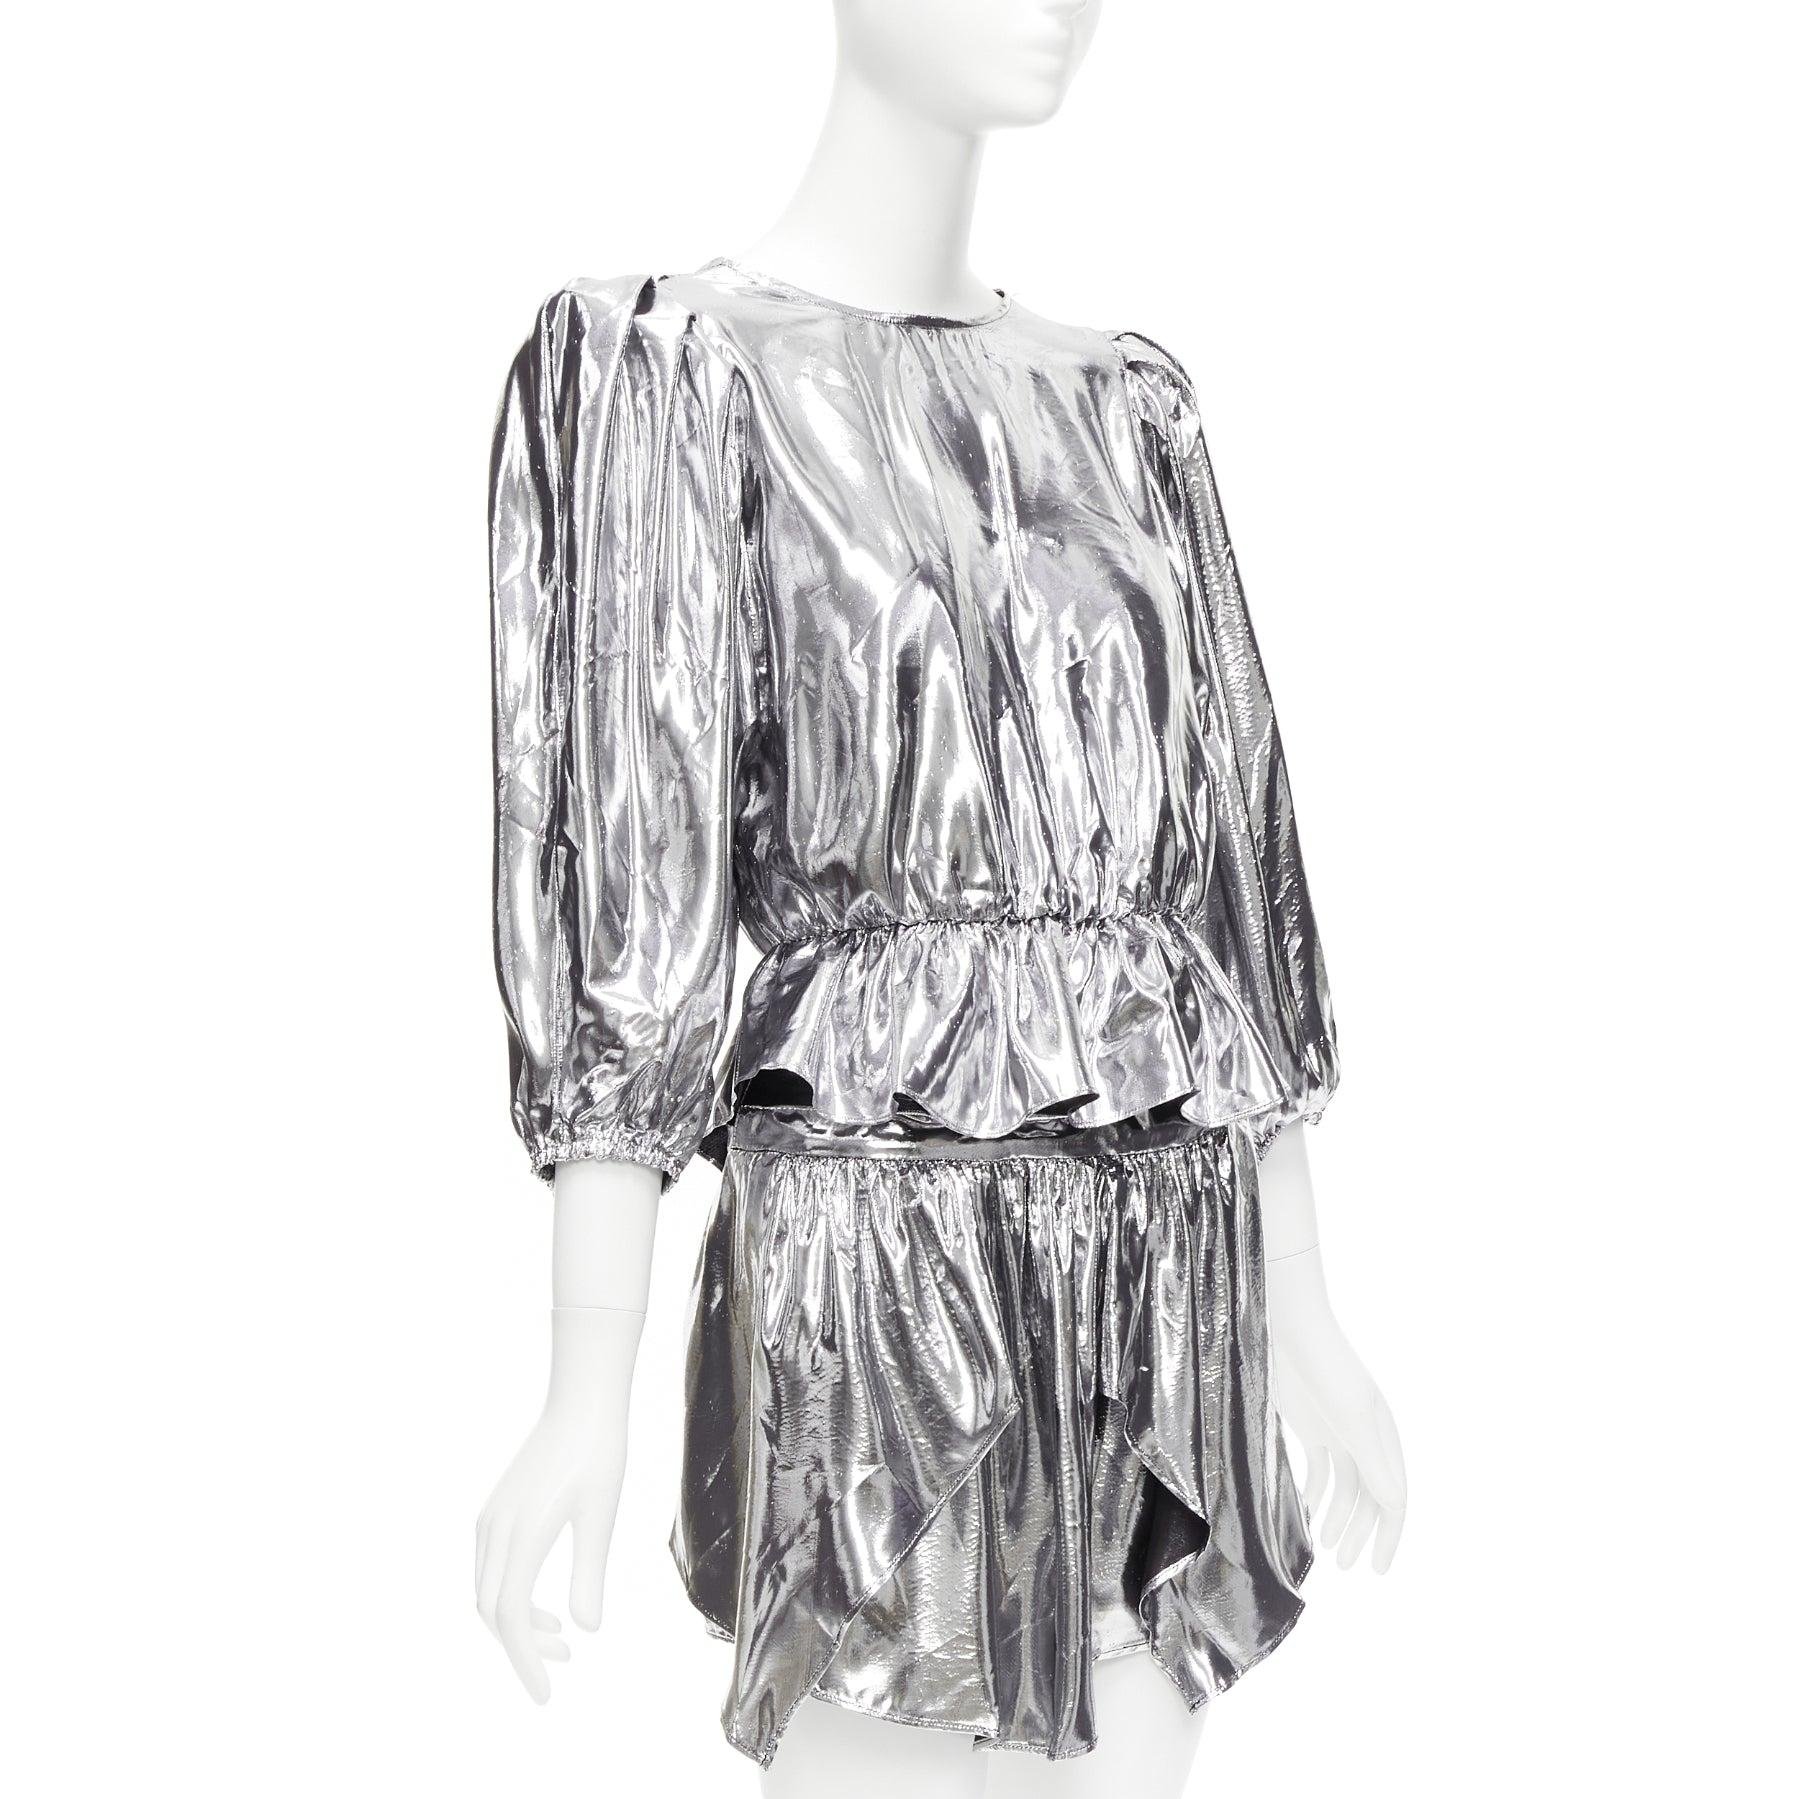 ISABEL MARANT metallic silver silk blend puff sleeve top flare skirt FR34 XS
Reference: AAWC/A00593
Brand: Isabel Marant
Model: Kira skir
Material: Silk, Blend
Color: Silver
Pattern: Solid
Closure: Slip On
Lining: Black Cotton
Extra Details: Slip on